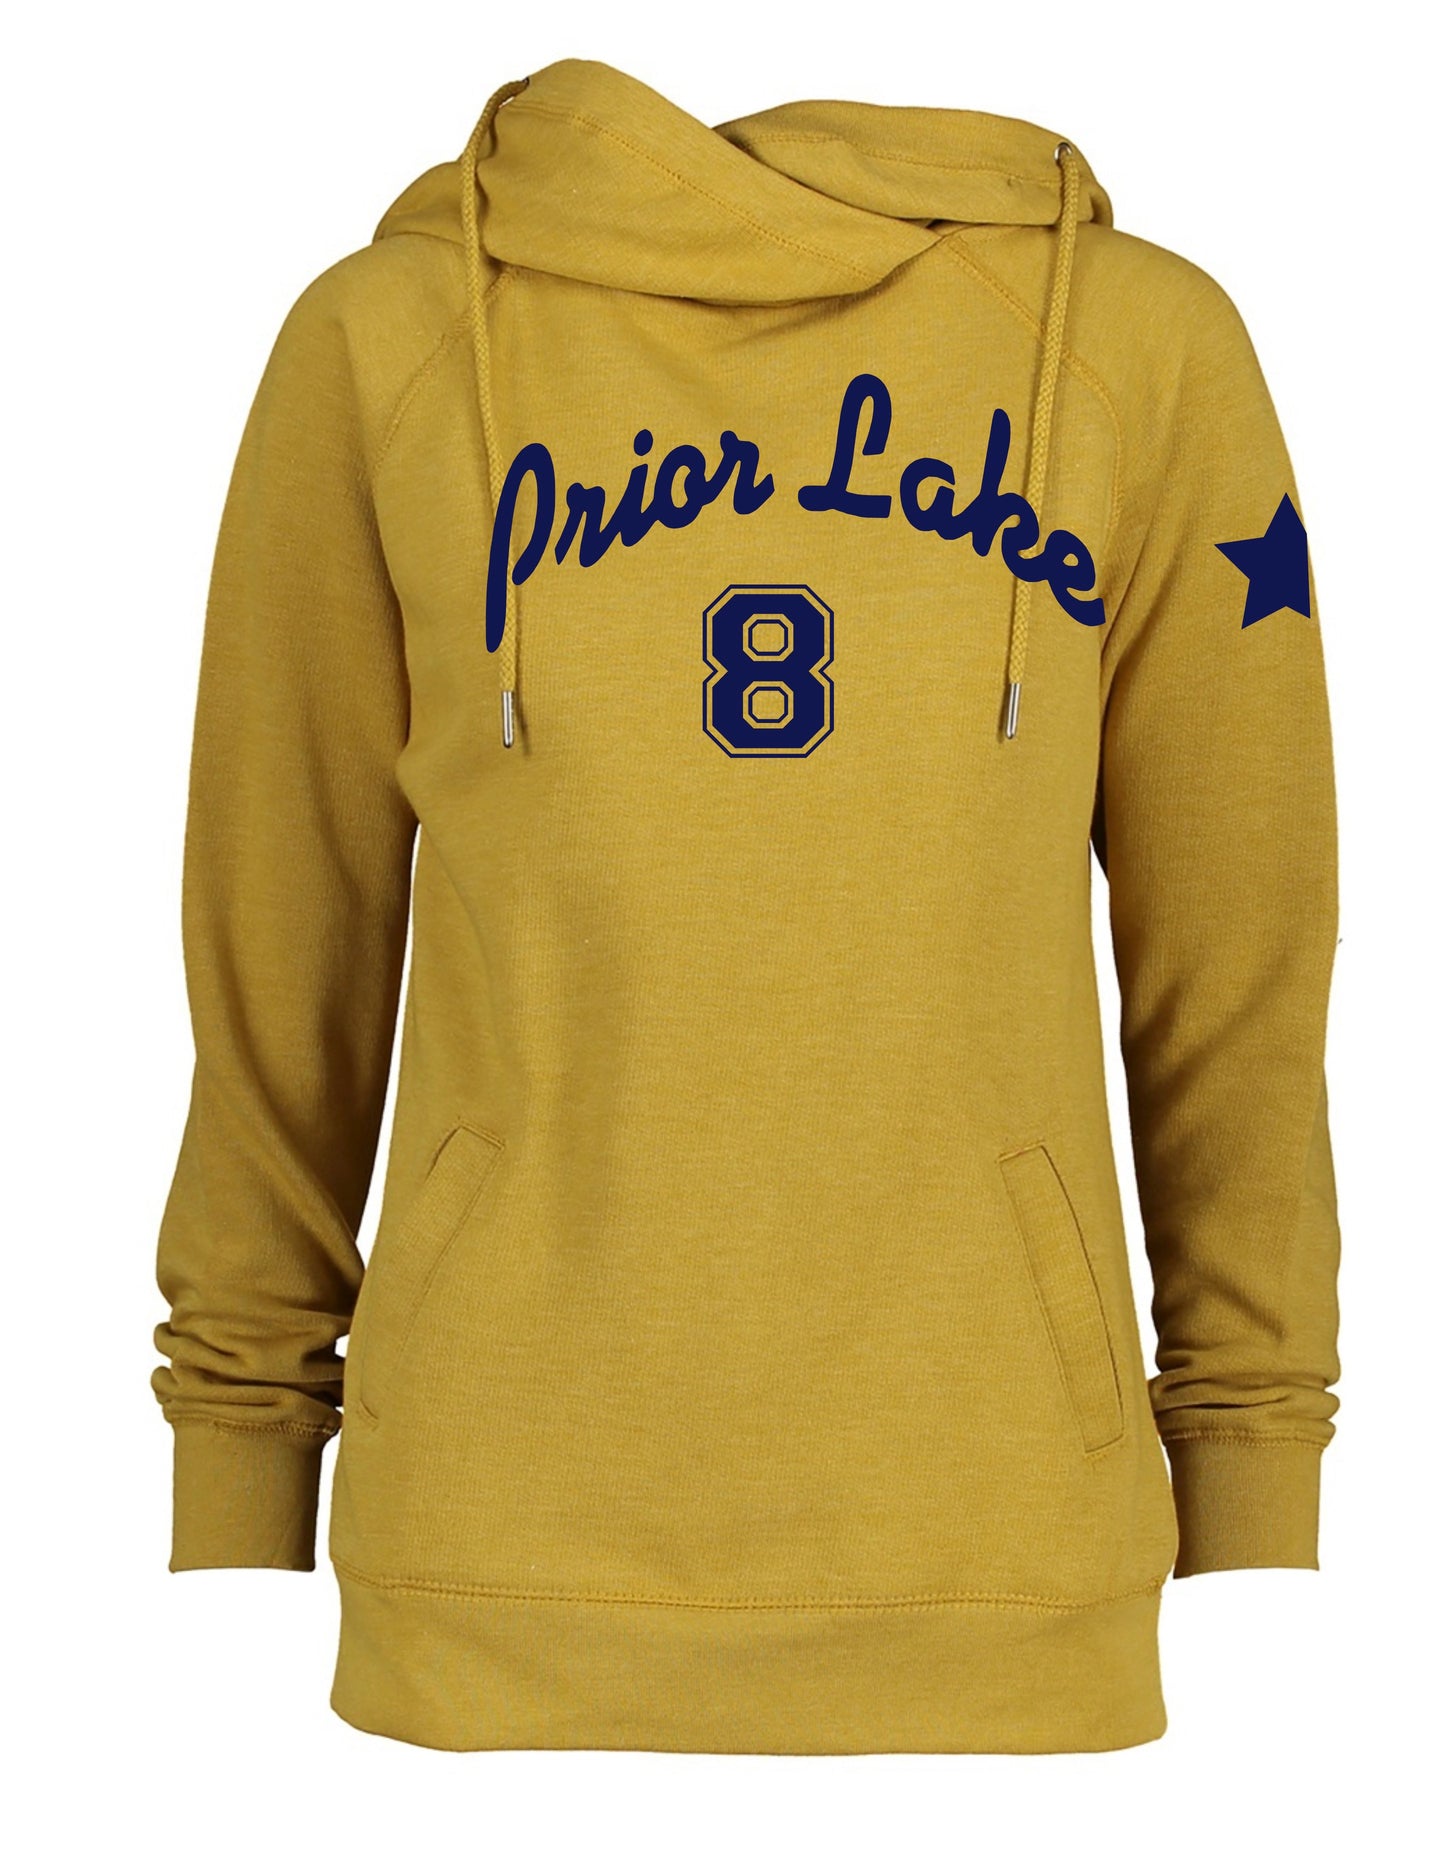 Prior lake STATE or NUMBER  GOLD